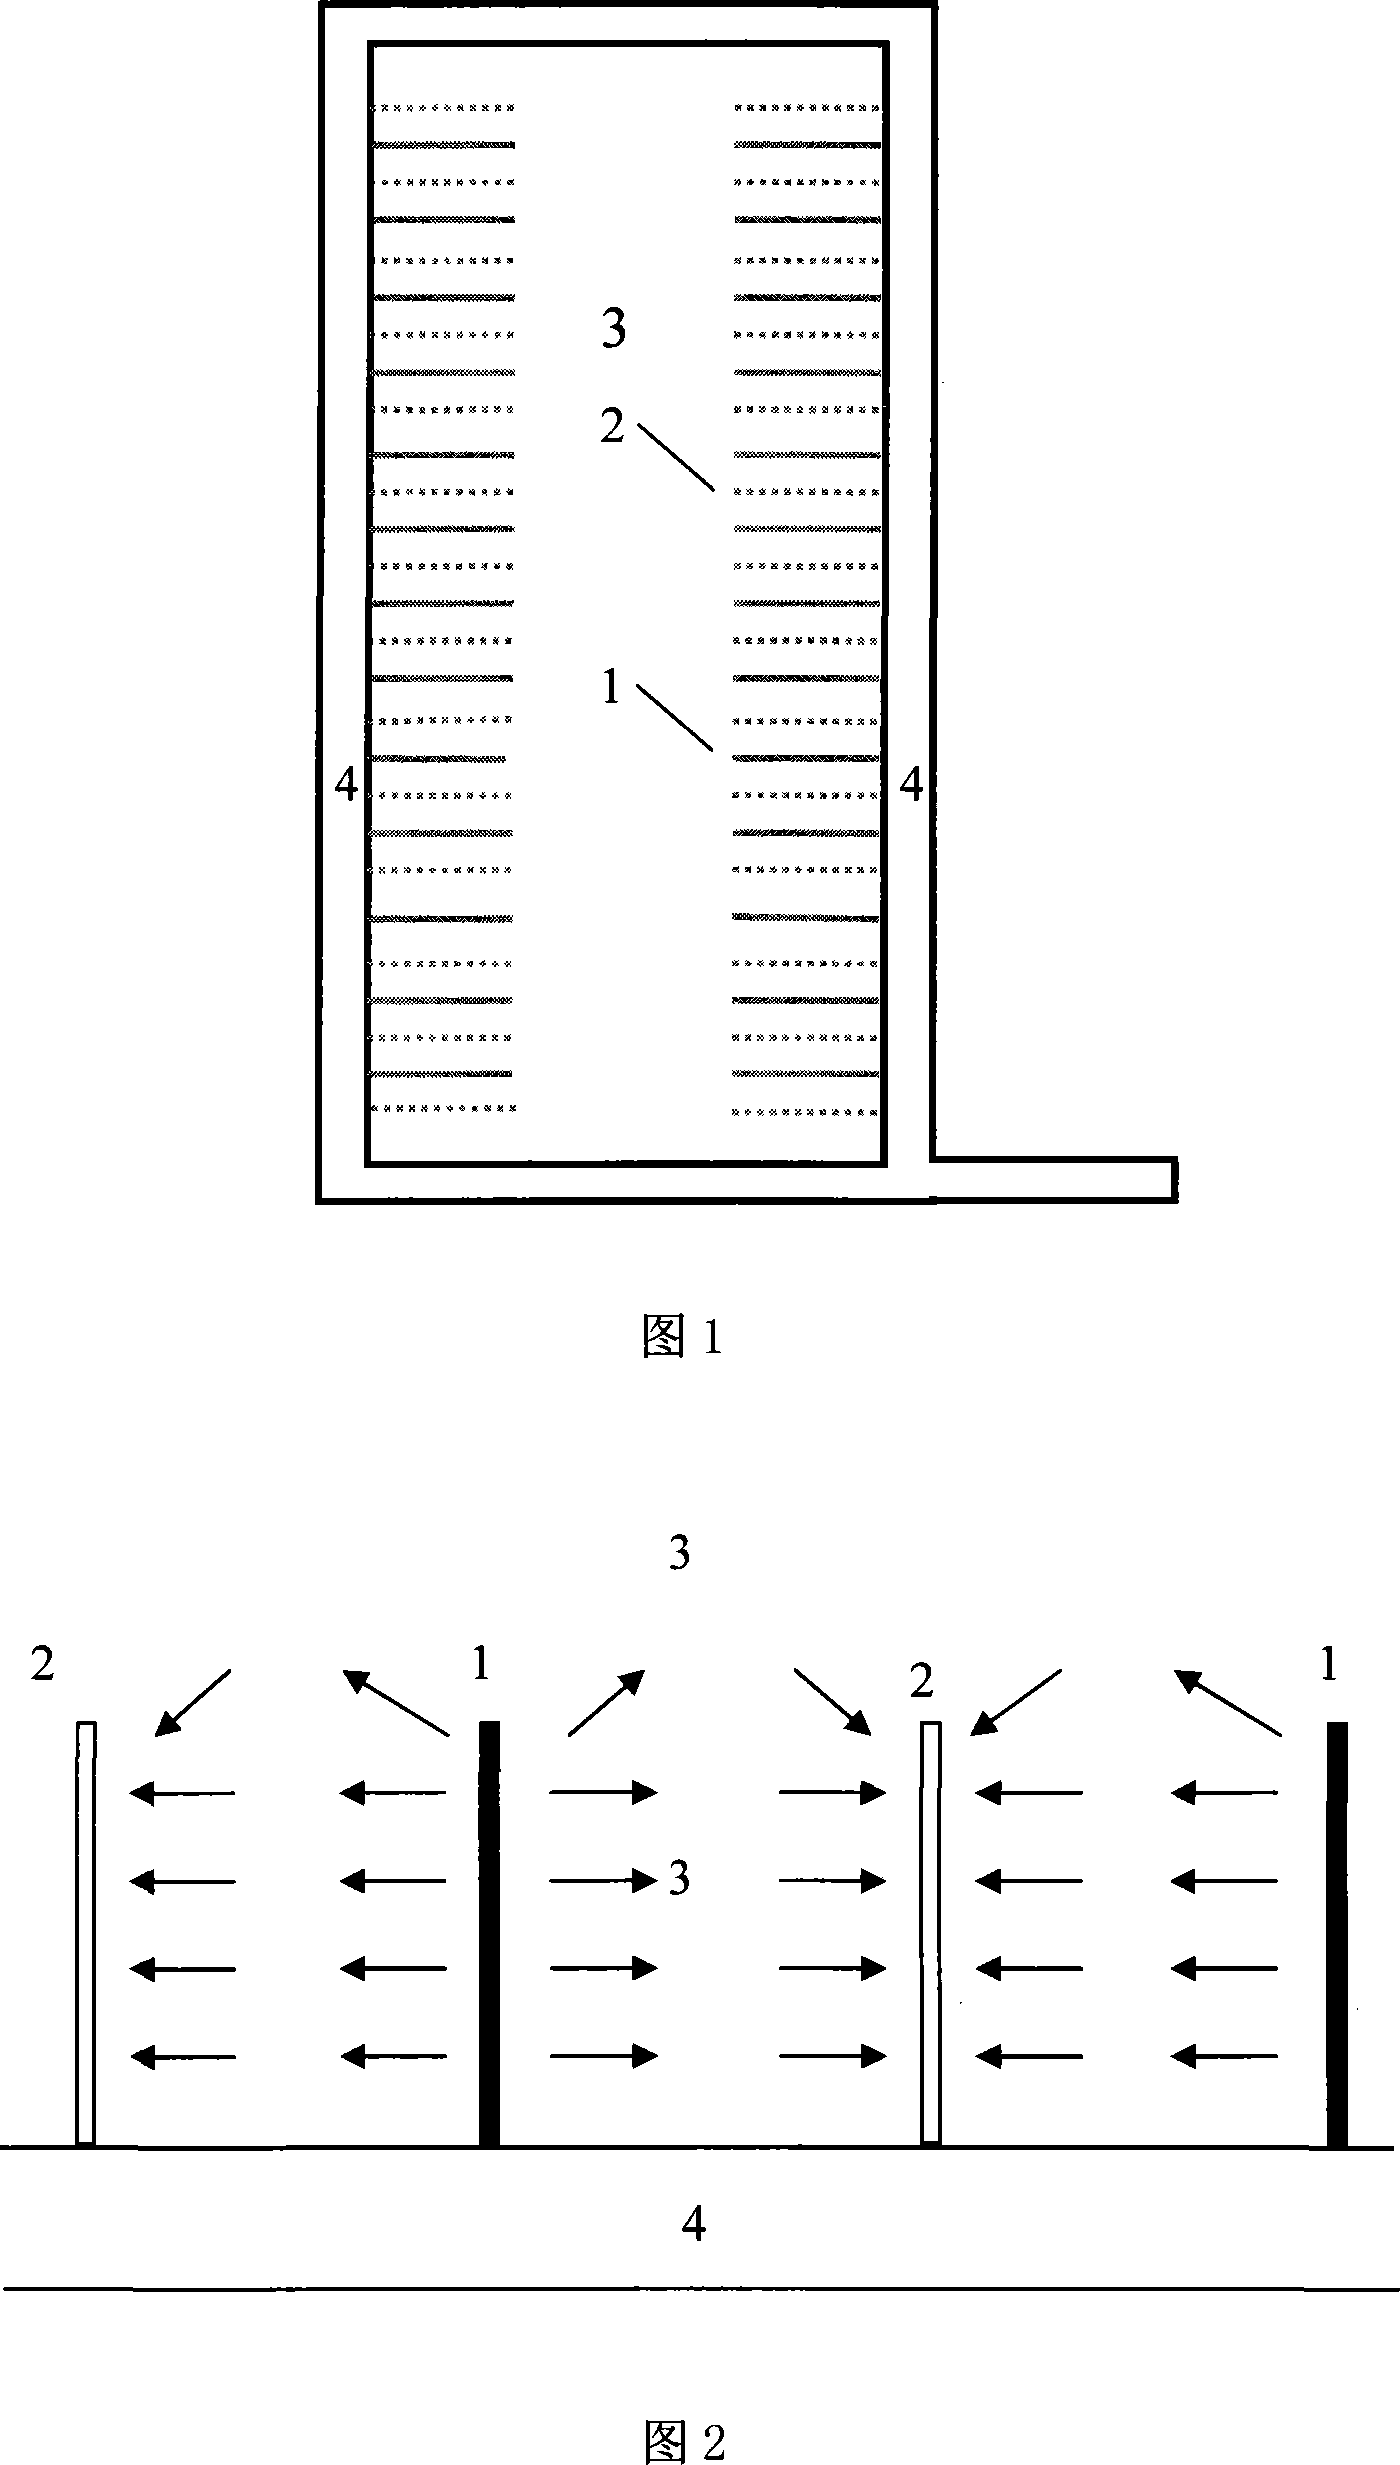 Down-hole horizontal hole exploitation system for mixing gas displacing coal gas, and the method